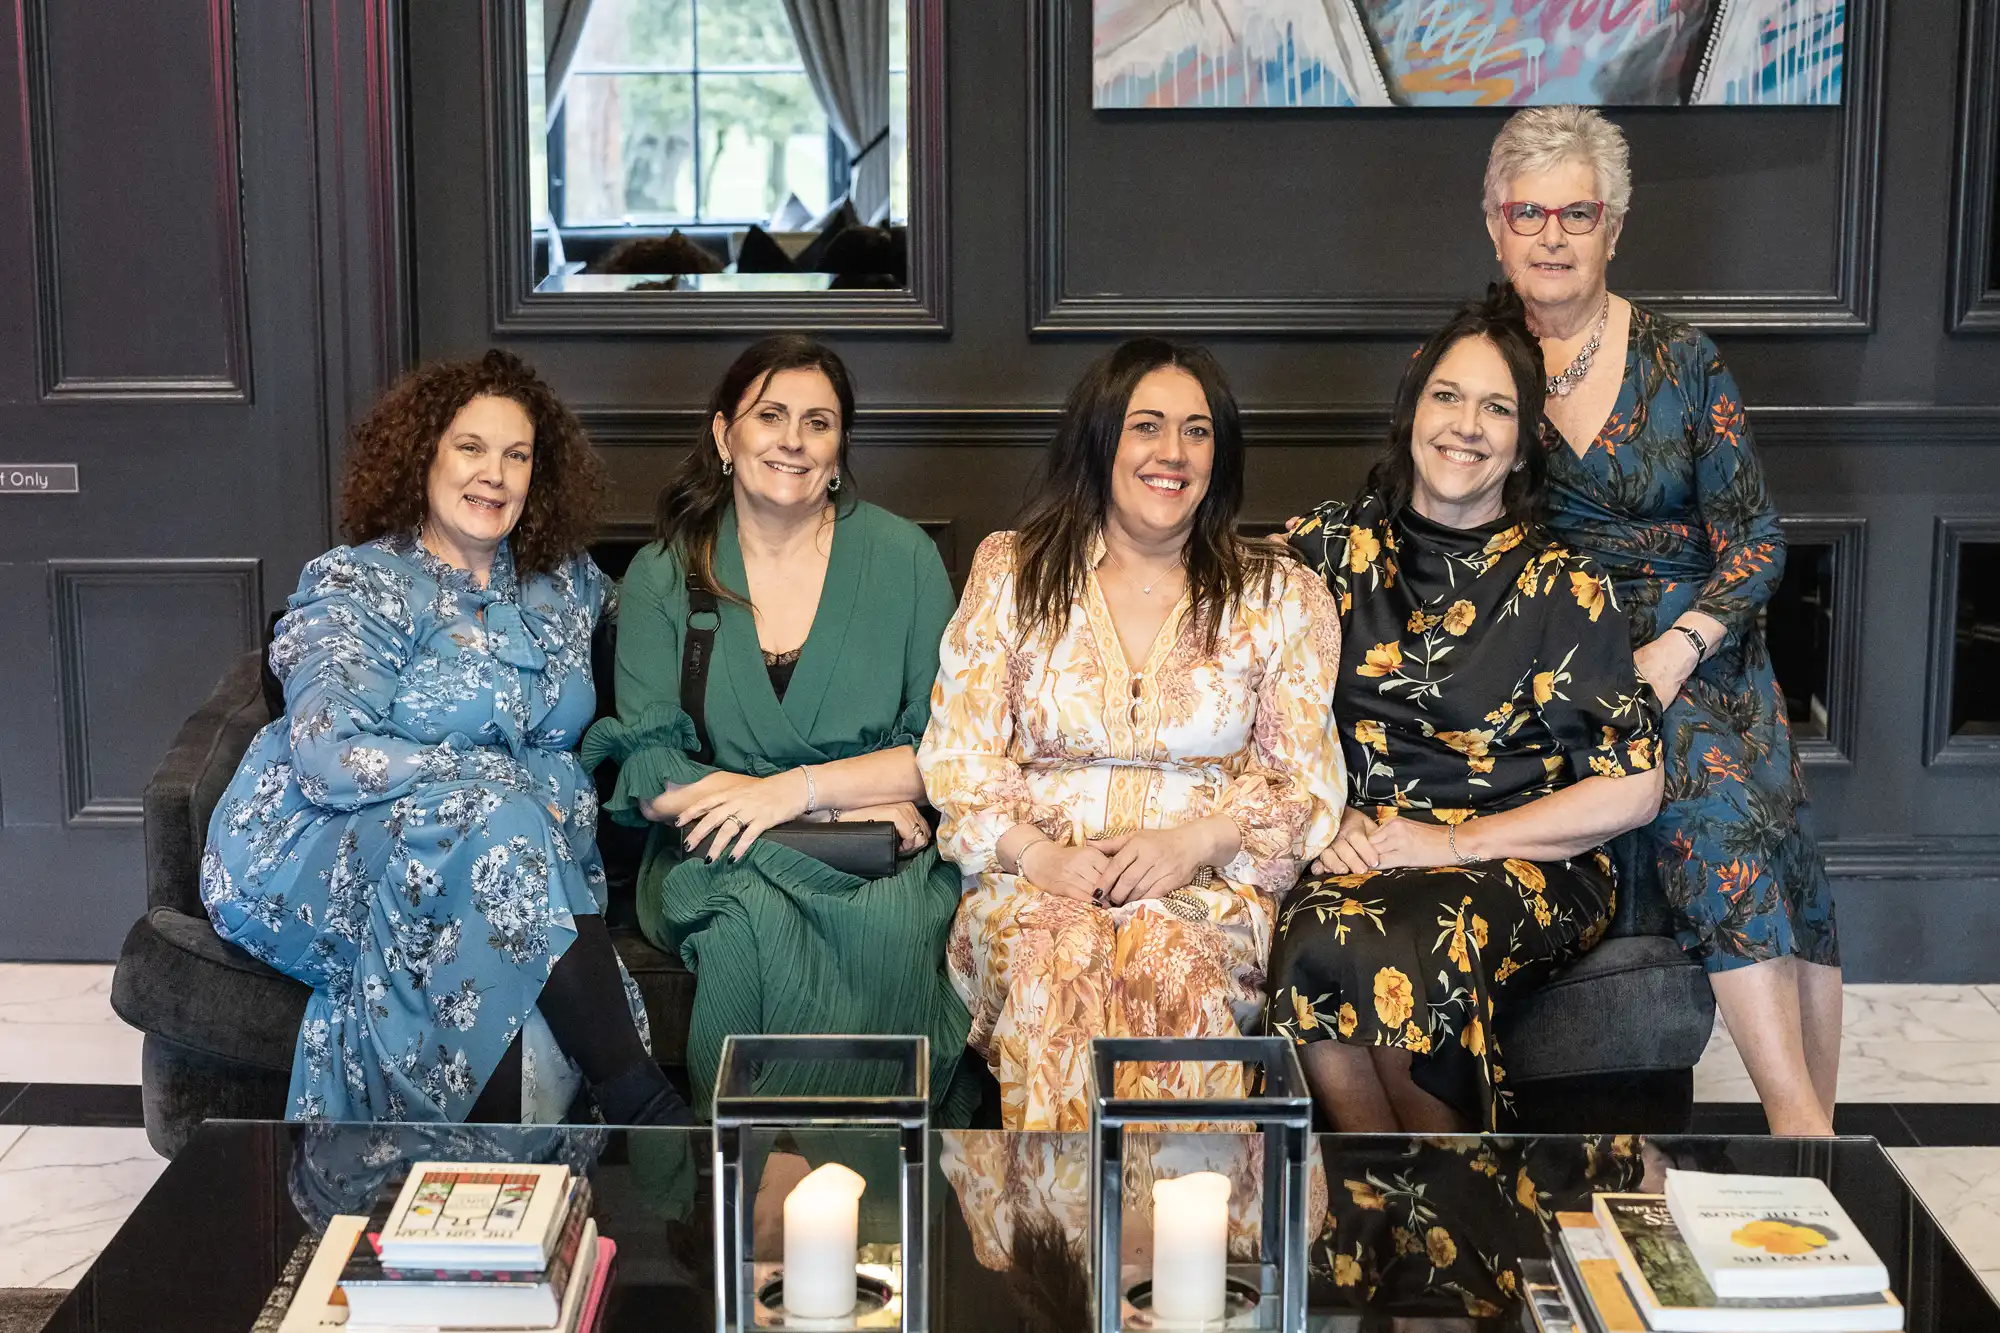 Five women sit together on a couch, dressed in colorful floral outfits, posing for a group photo. A dark wall with framed artwork is in the background. Two candles and books are on a glass coffee table.